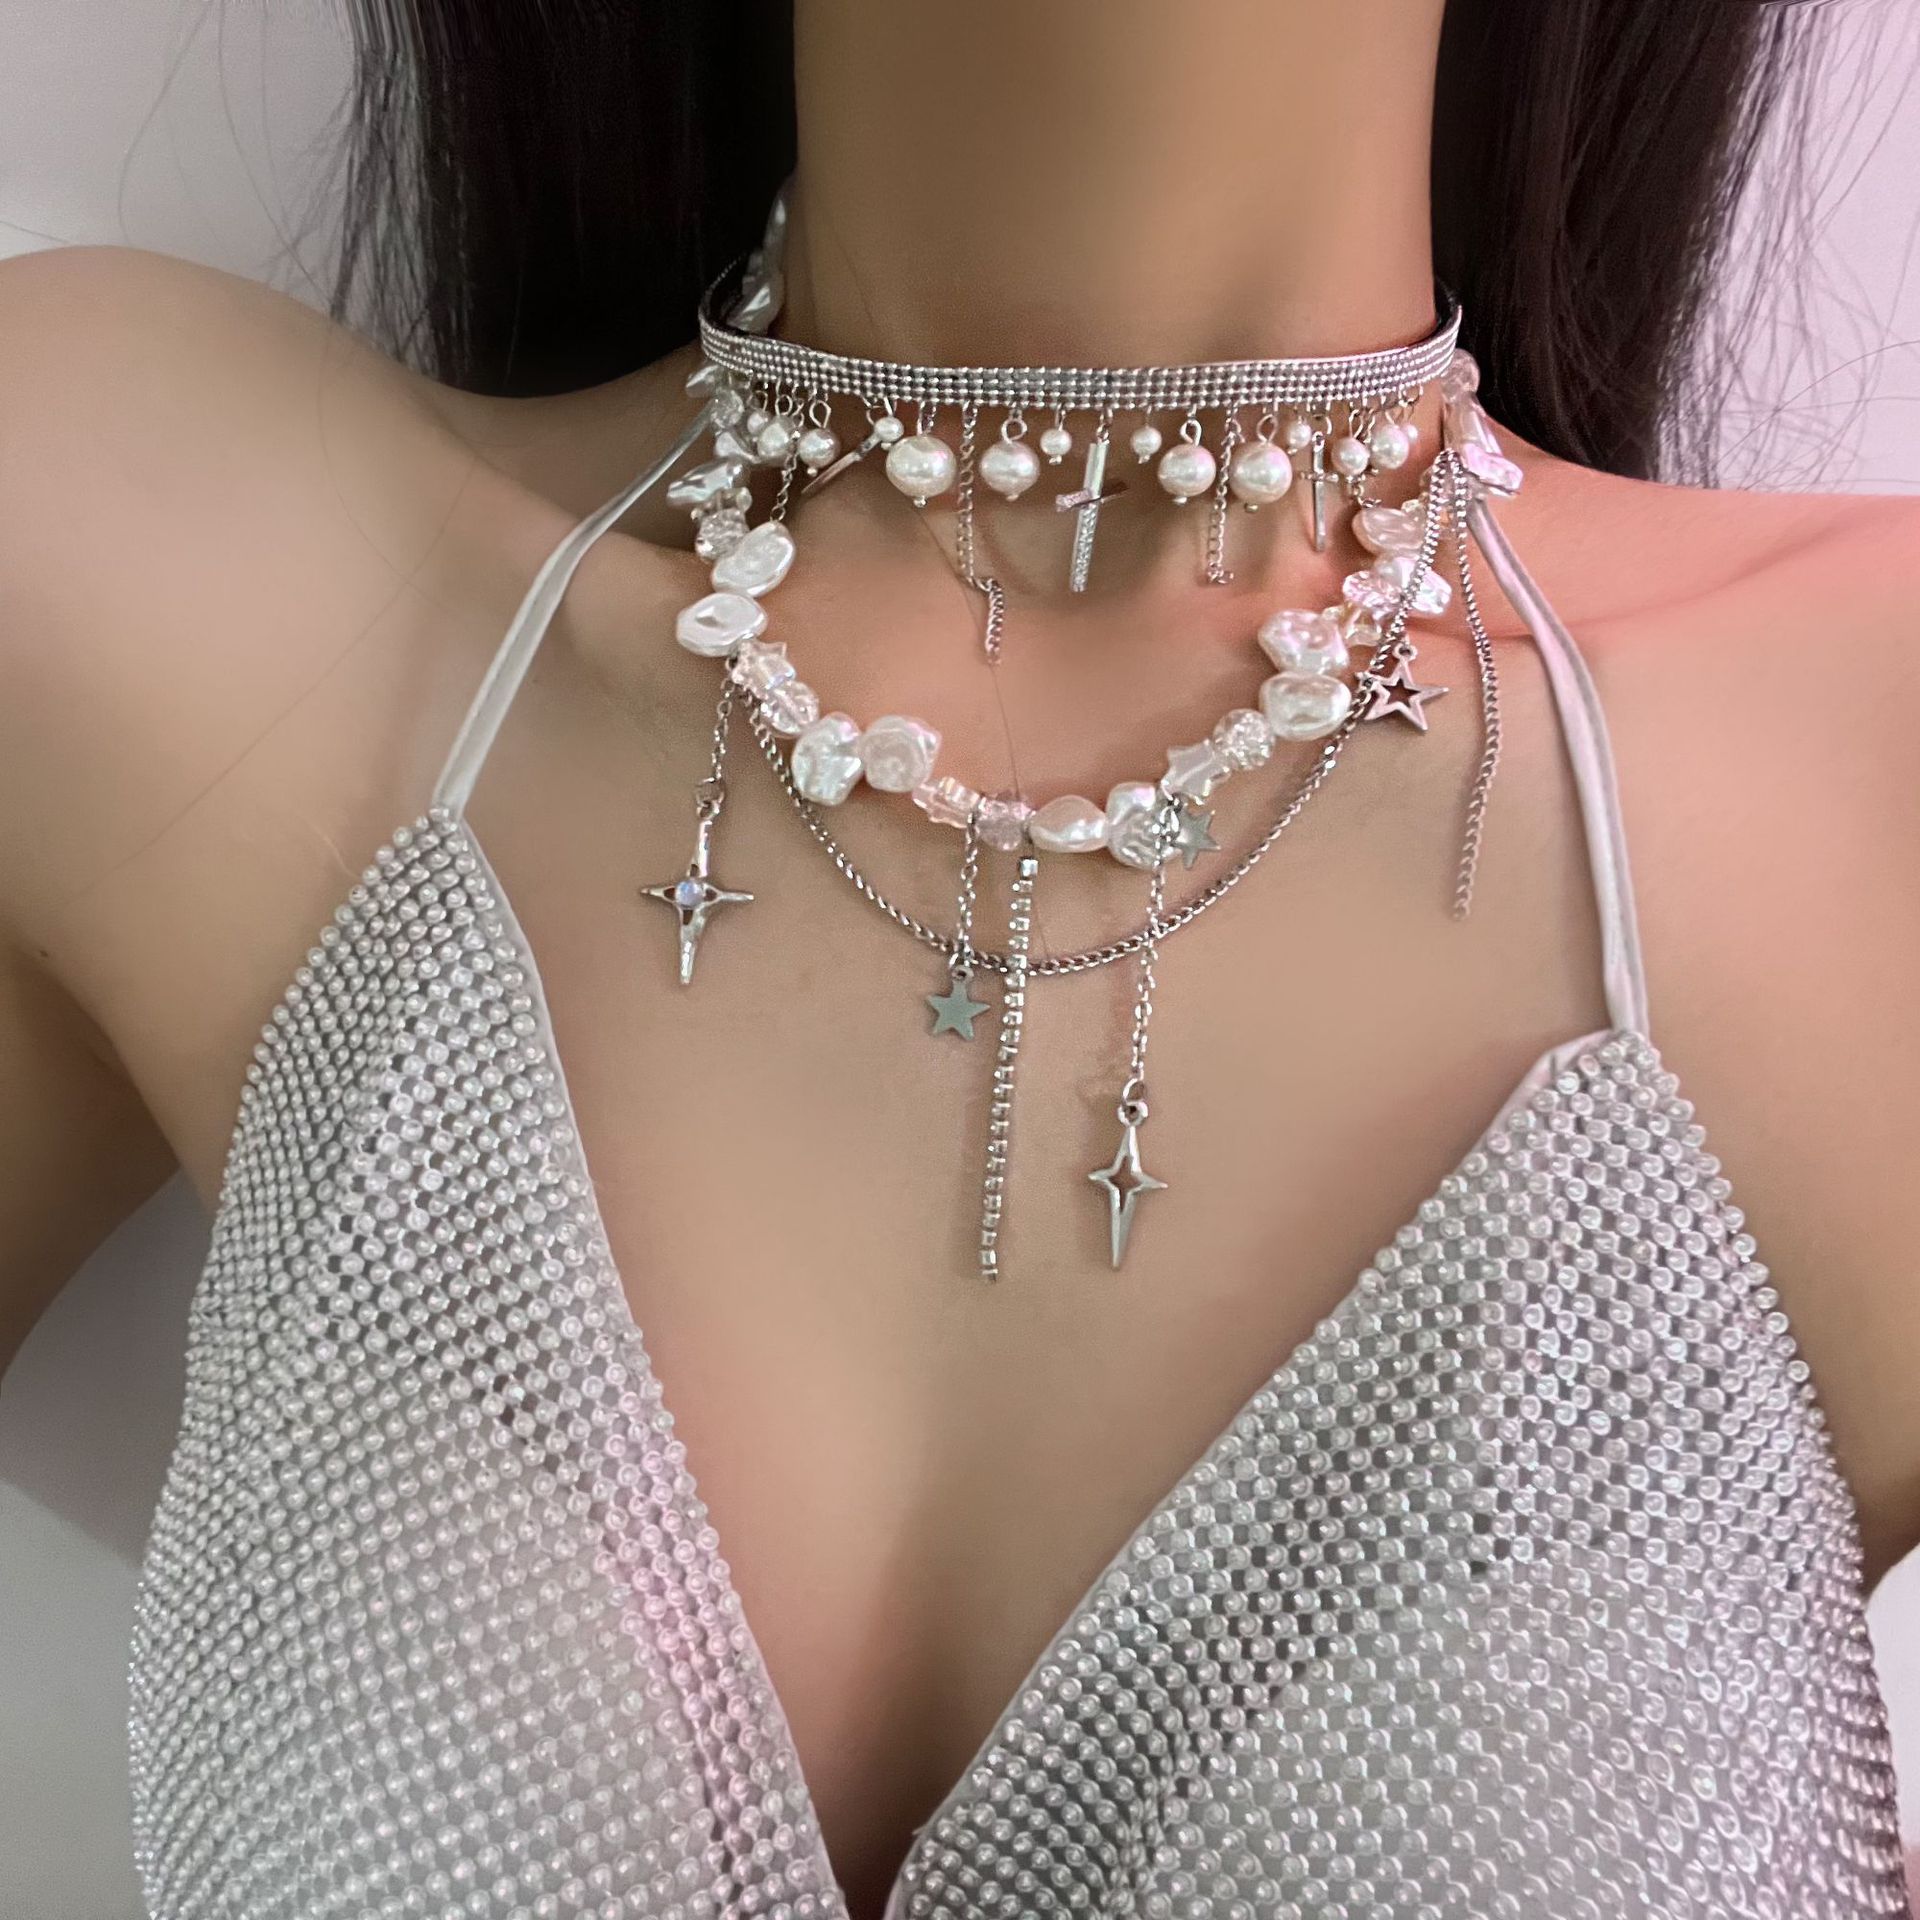 the Structure Is Super Beautiful! Eight-Pointed Stars Falling Design Handmade Beaded Baroque Pearl Winding Necklace Necklace Women's Light Luxury Small